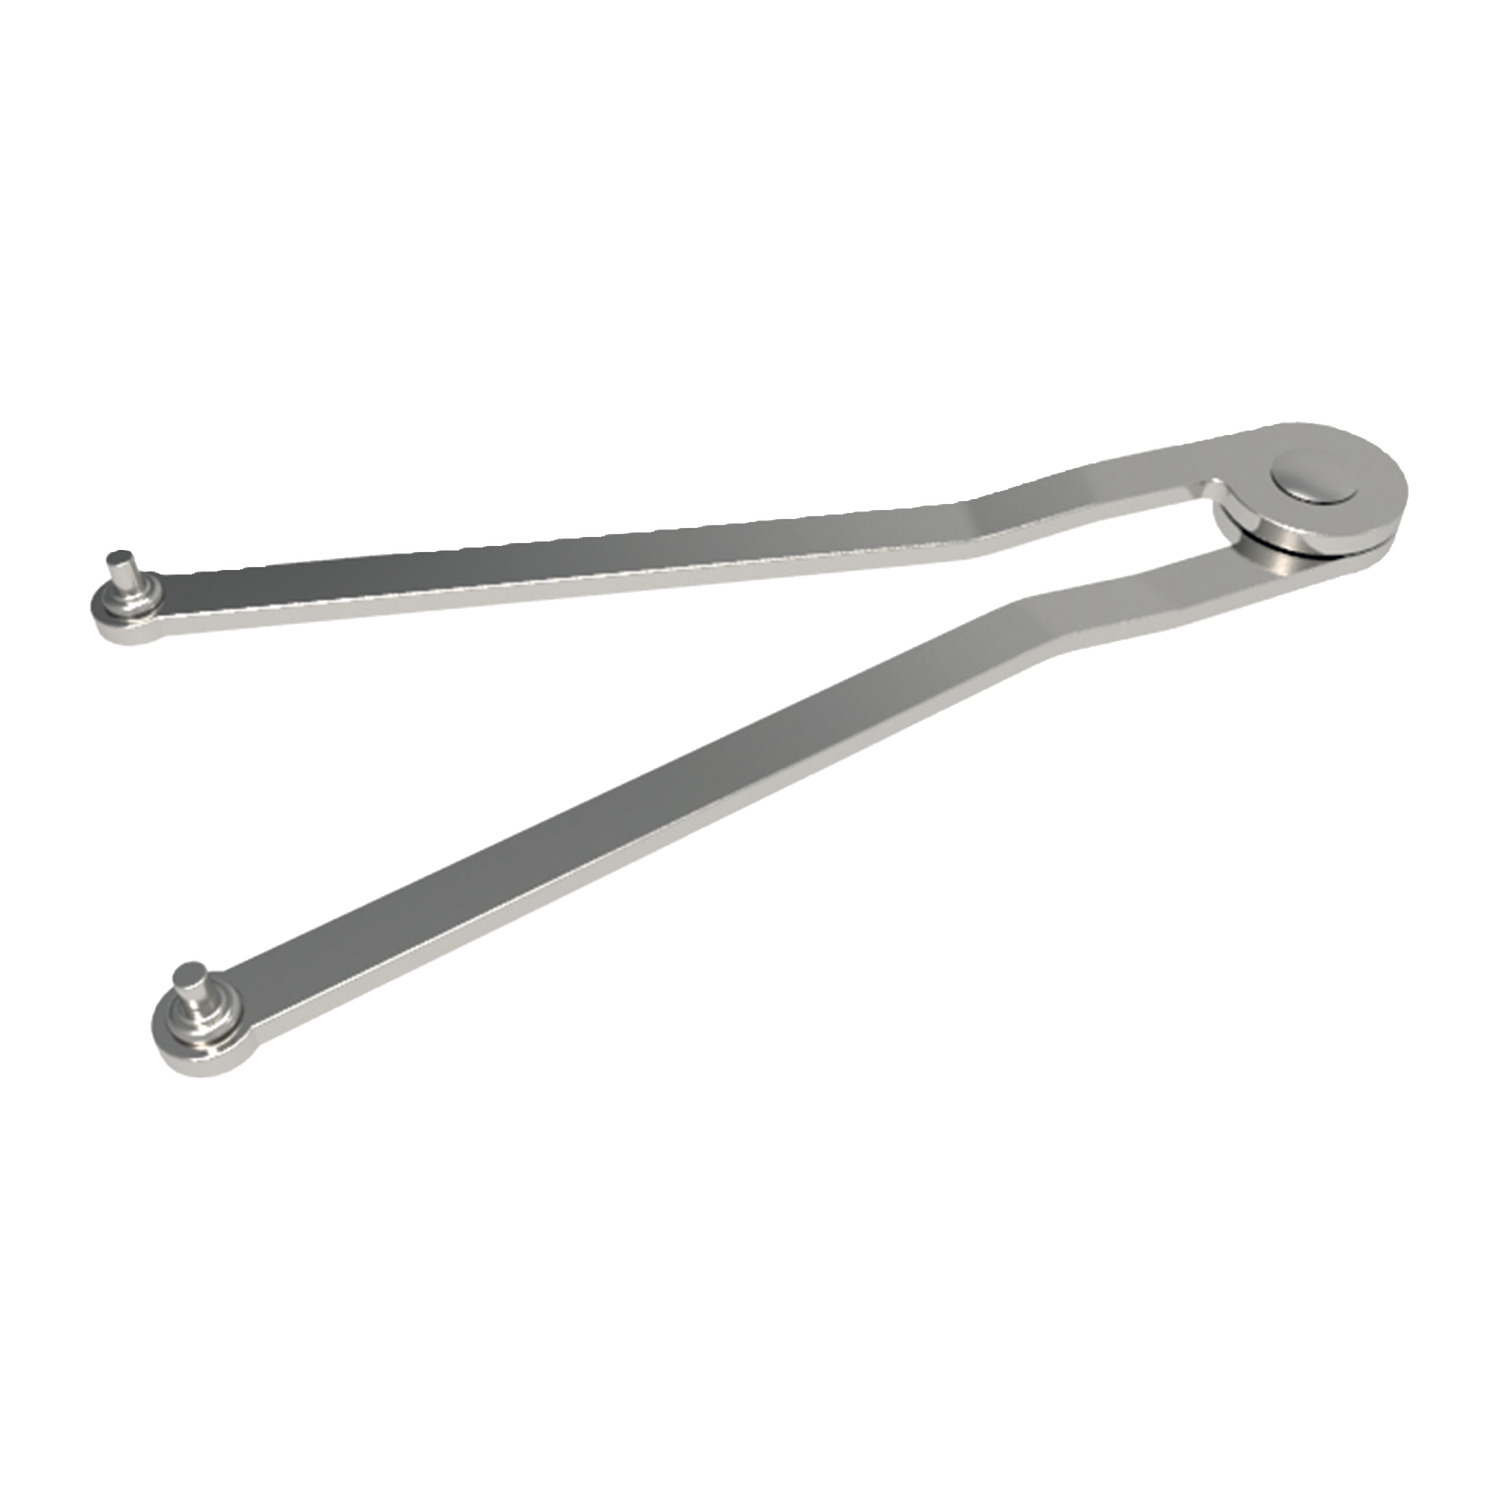 94000.W0561 Adjustabile Pin Face Spanners stainless - 11-60 - 162 - 4 - 4